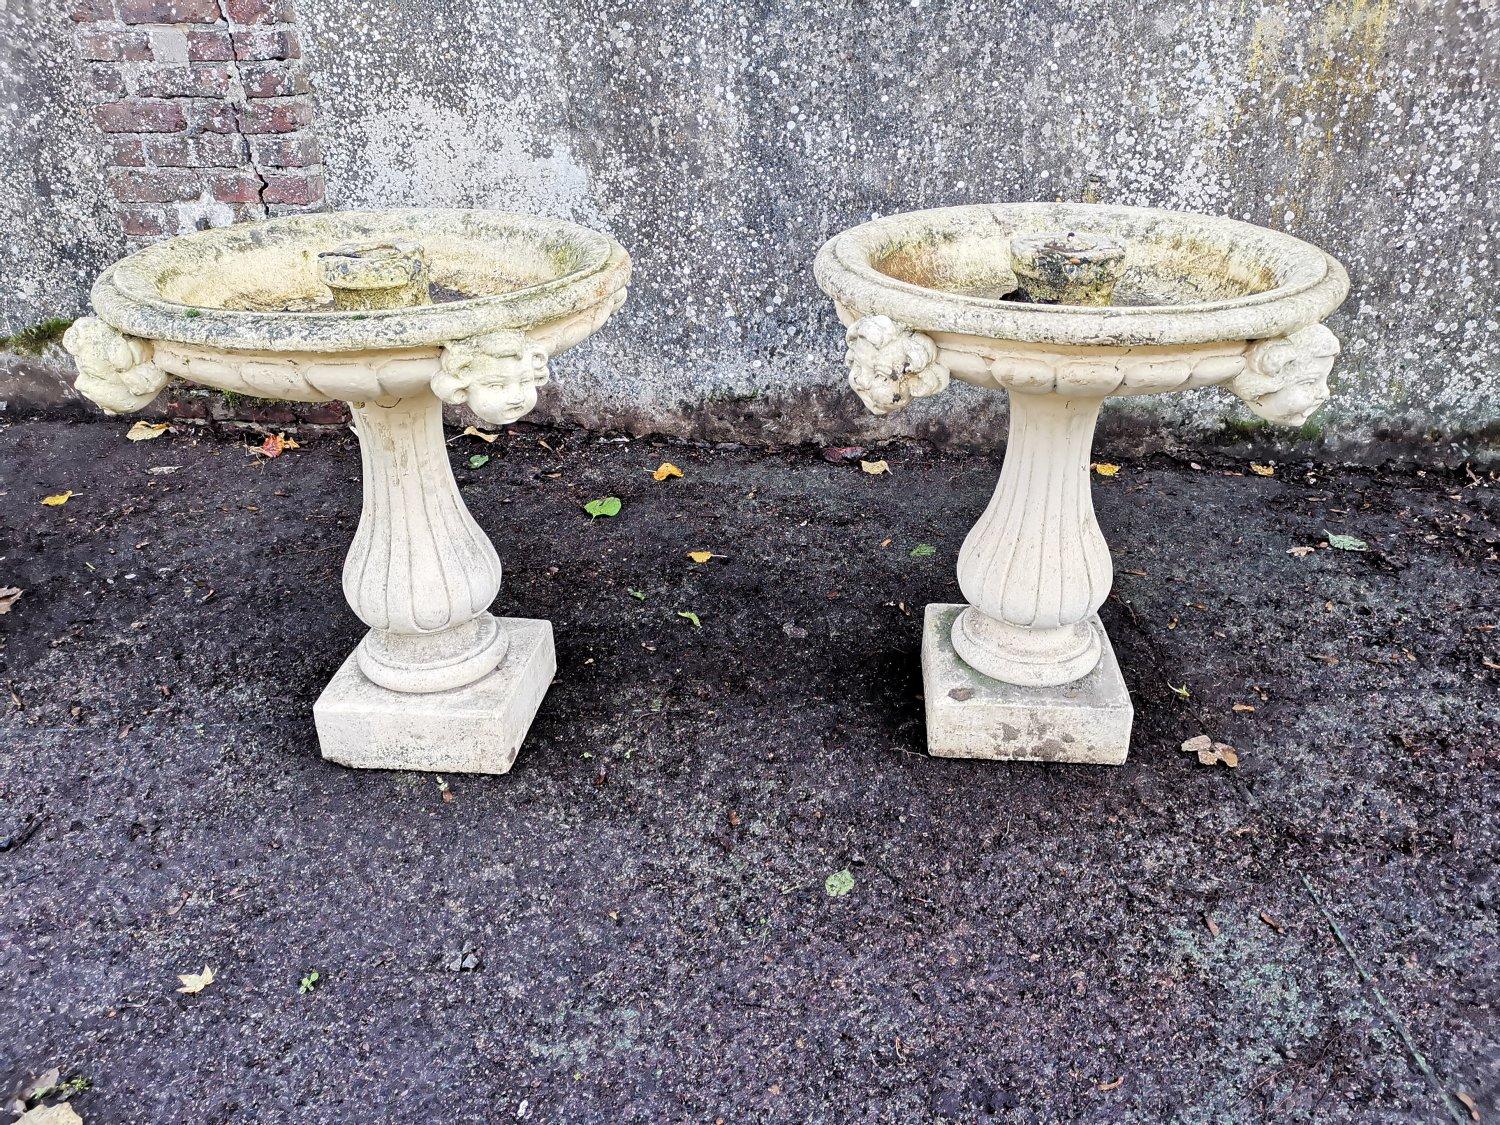 A wonderful pair of midcentury French cast concrete garden fountains with medieval heads to the basins.
These could have decorative fountain statues placed in the middle, or left as they are.
Priced individually.